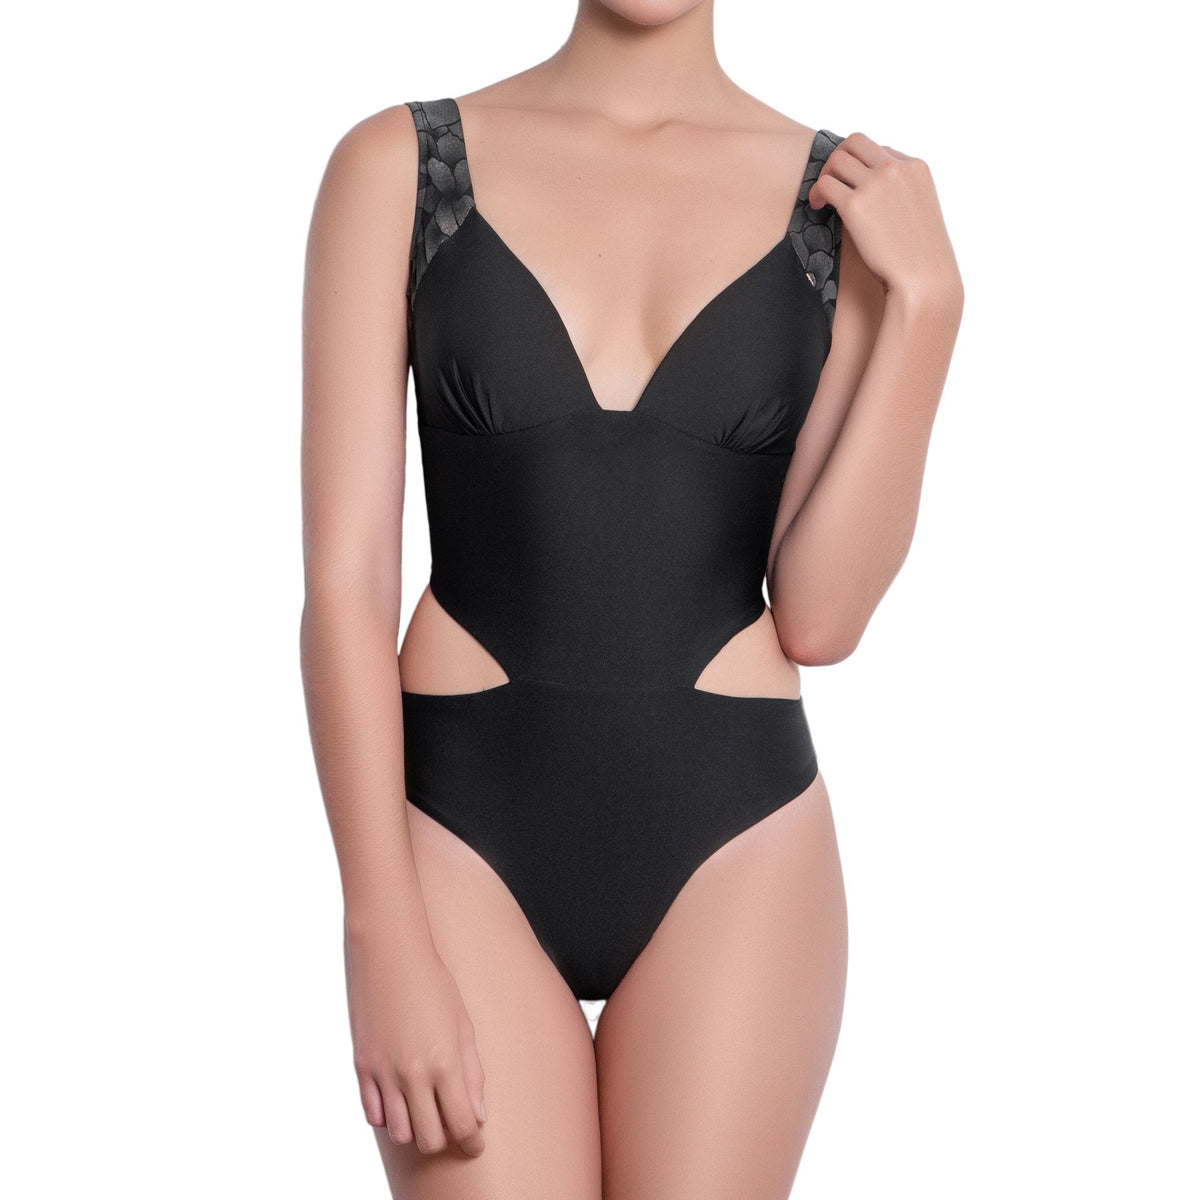 ISABELLE cut out one piece, bronze brocade straps black swimsuit by ALMA swimwear ‚Äì front view 1